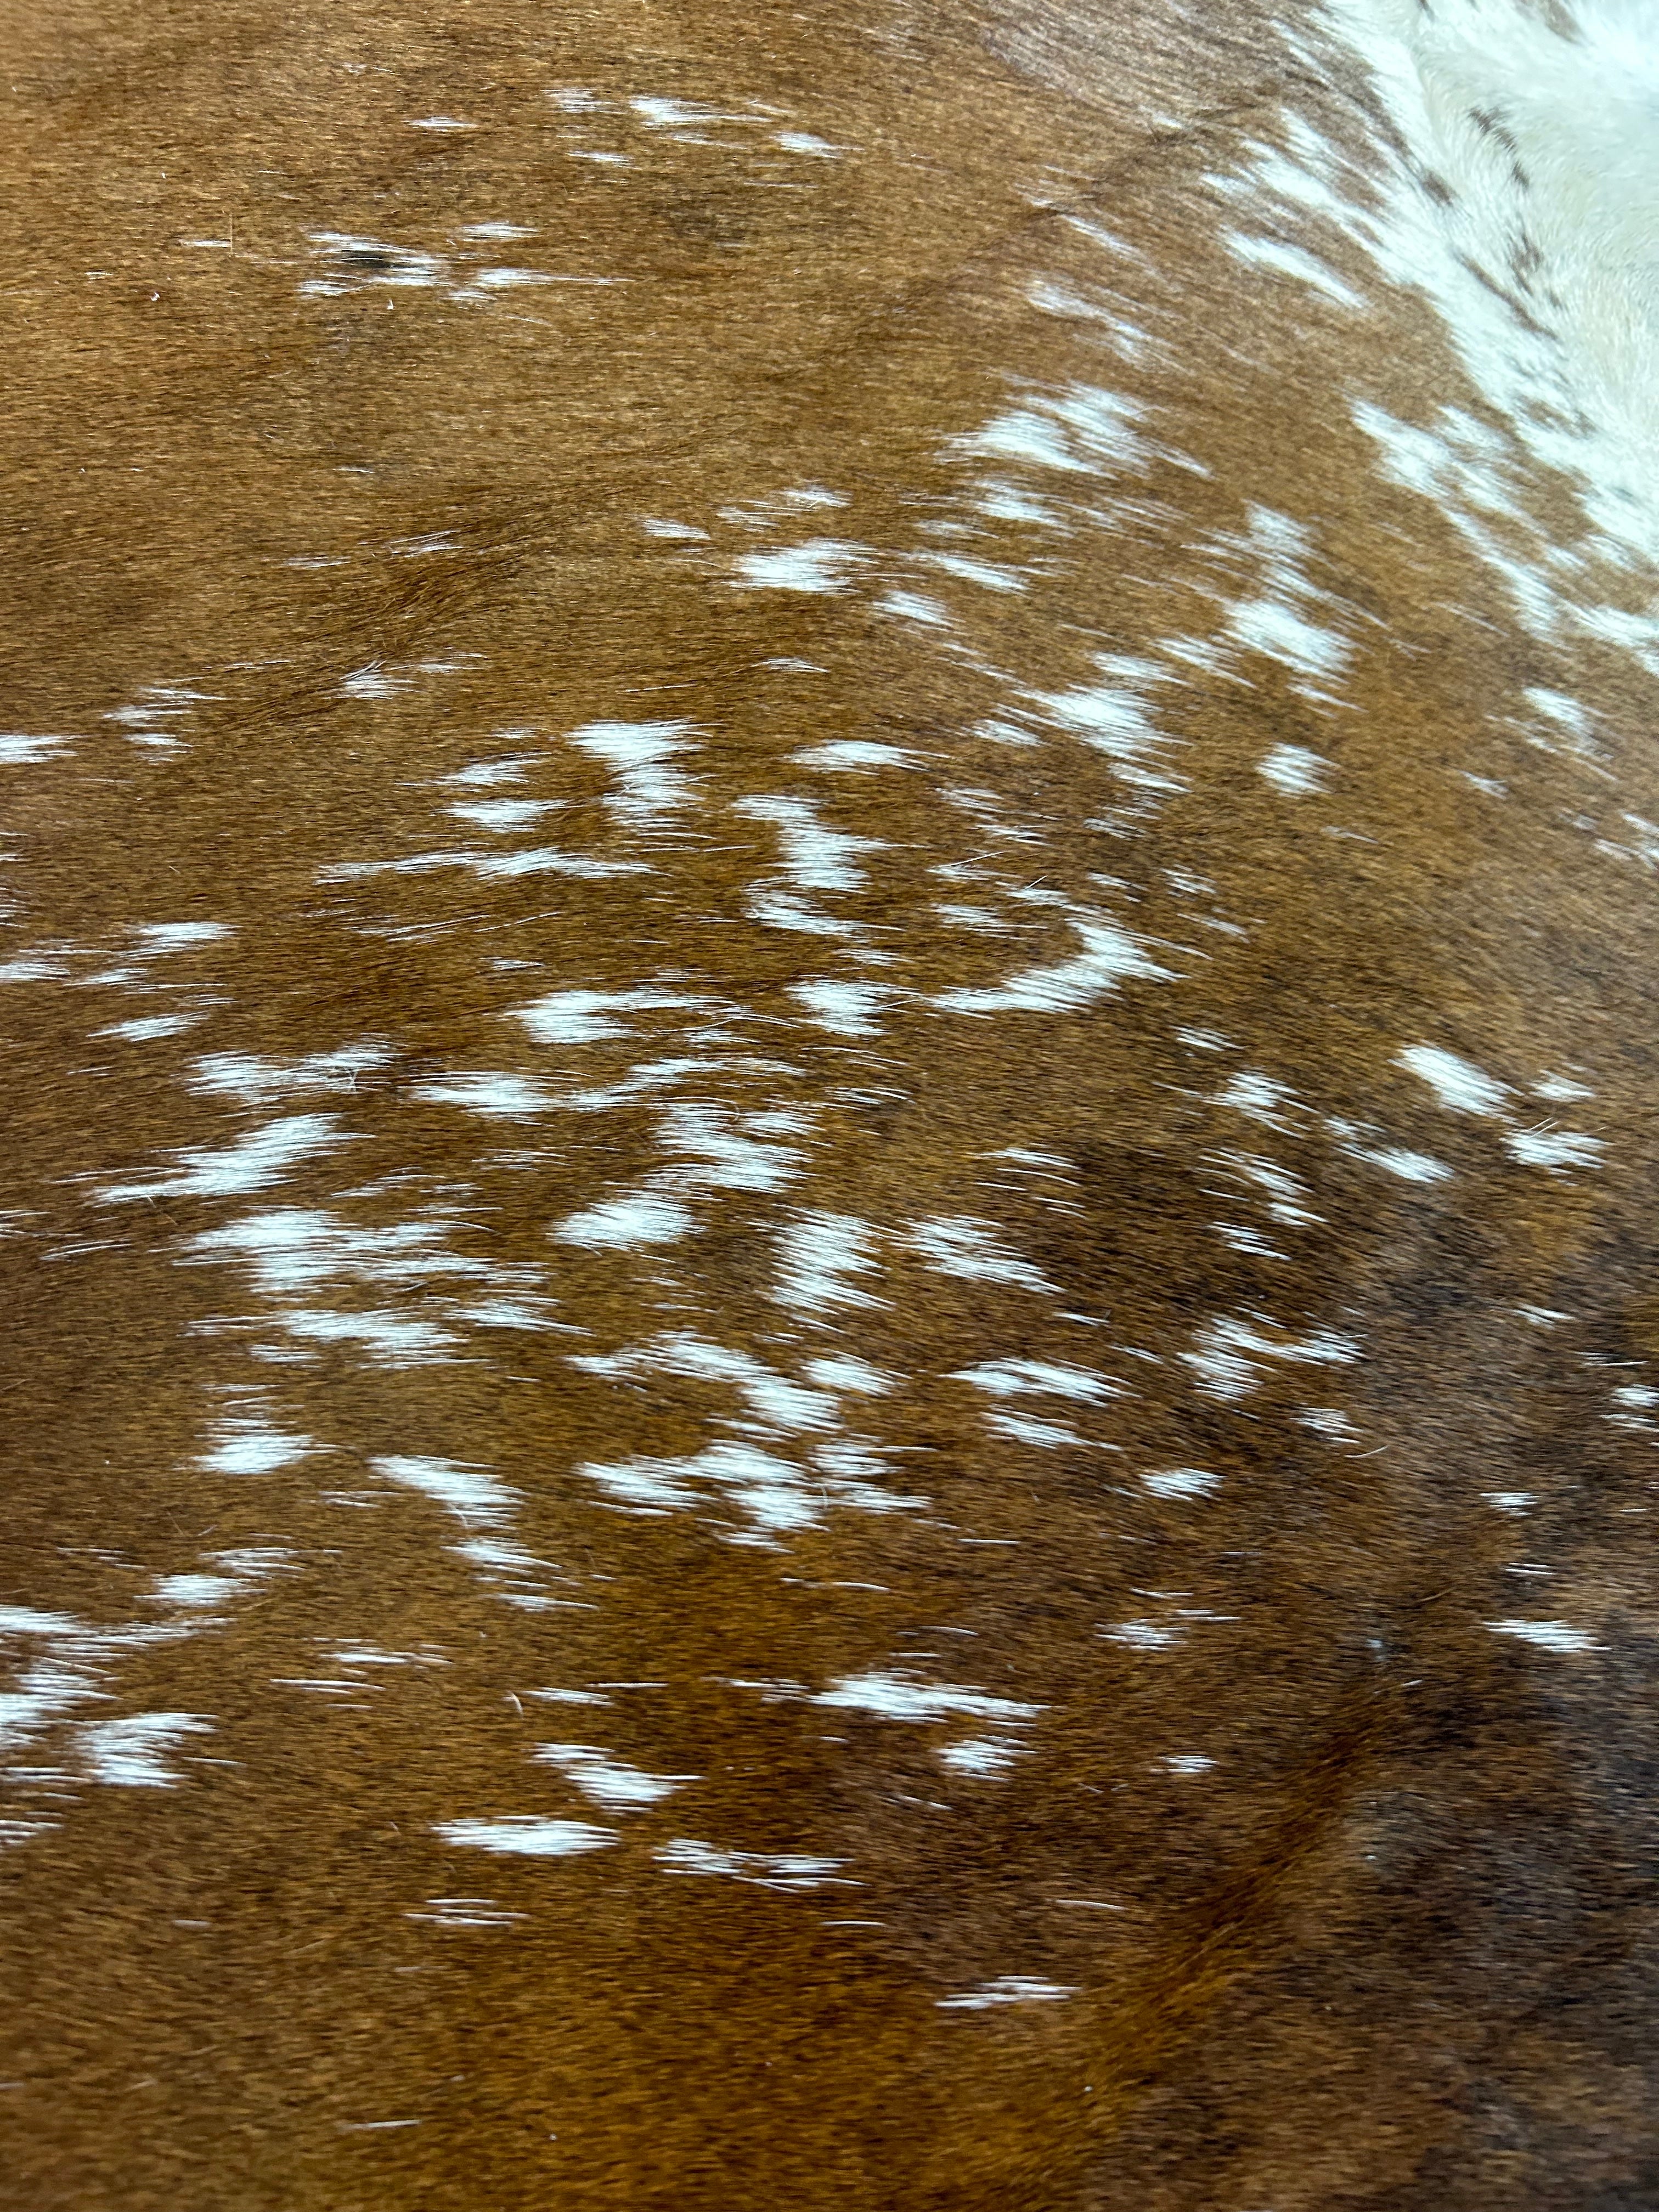 Brown & White Speckled Cowhide Rug (stitches) Size: 6x6 feet D-054